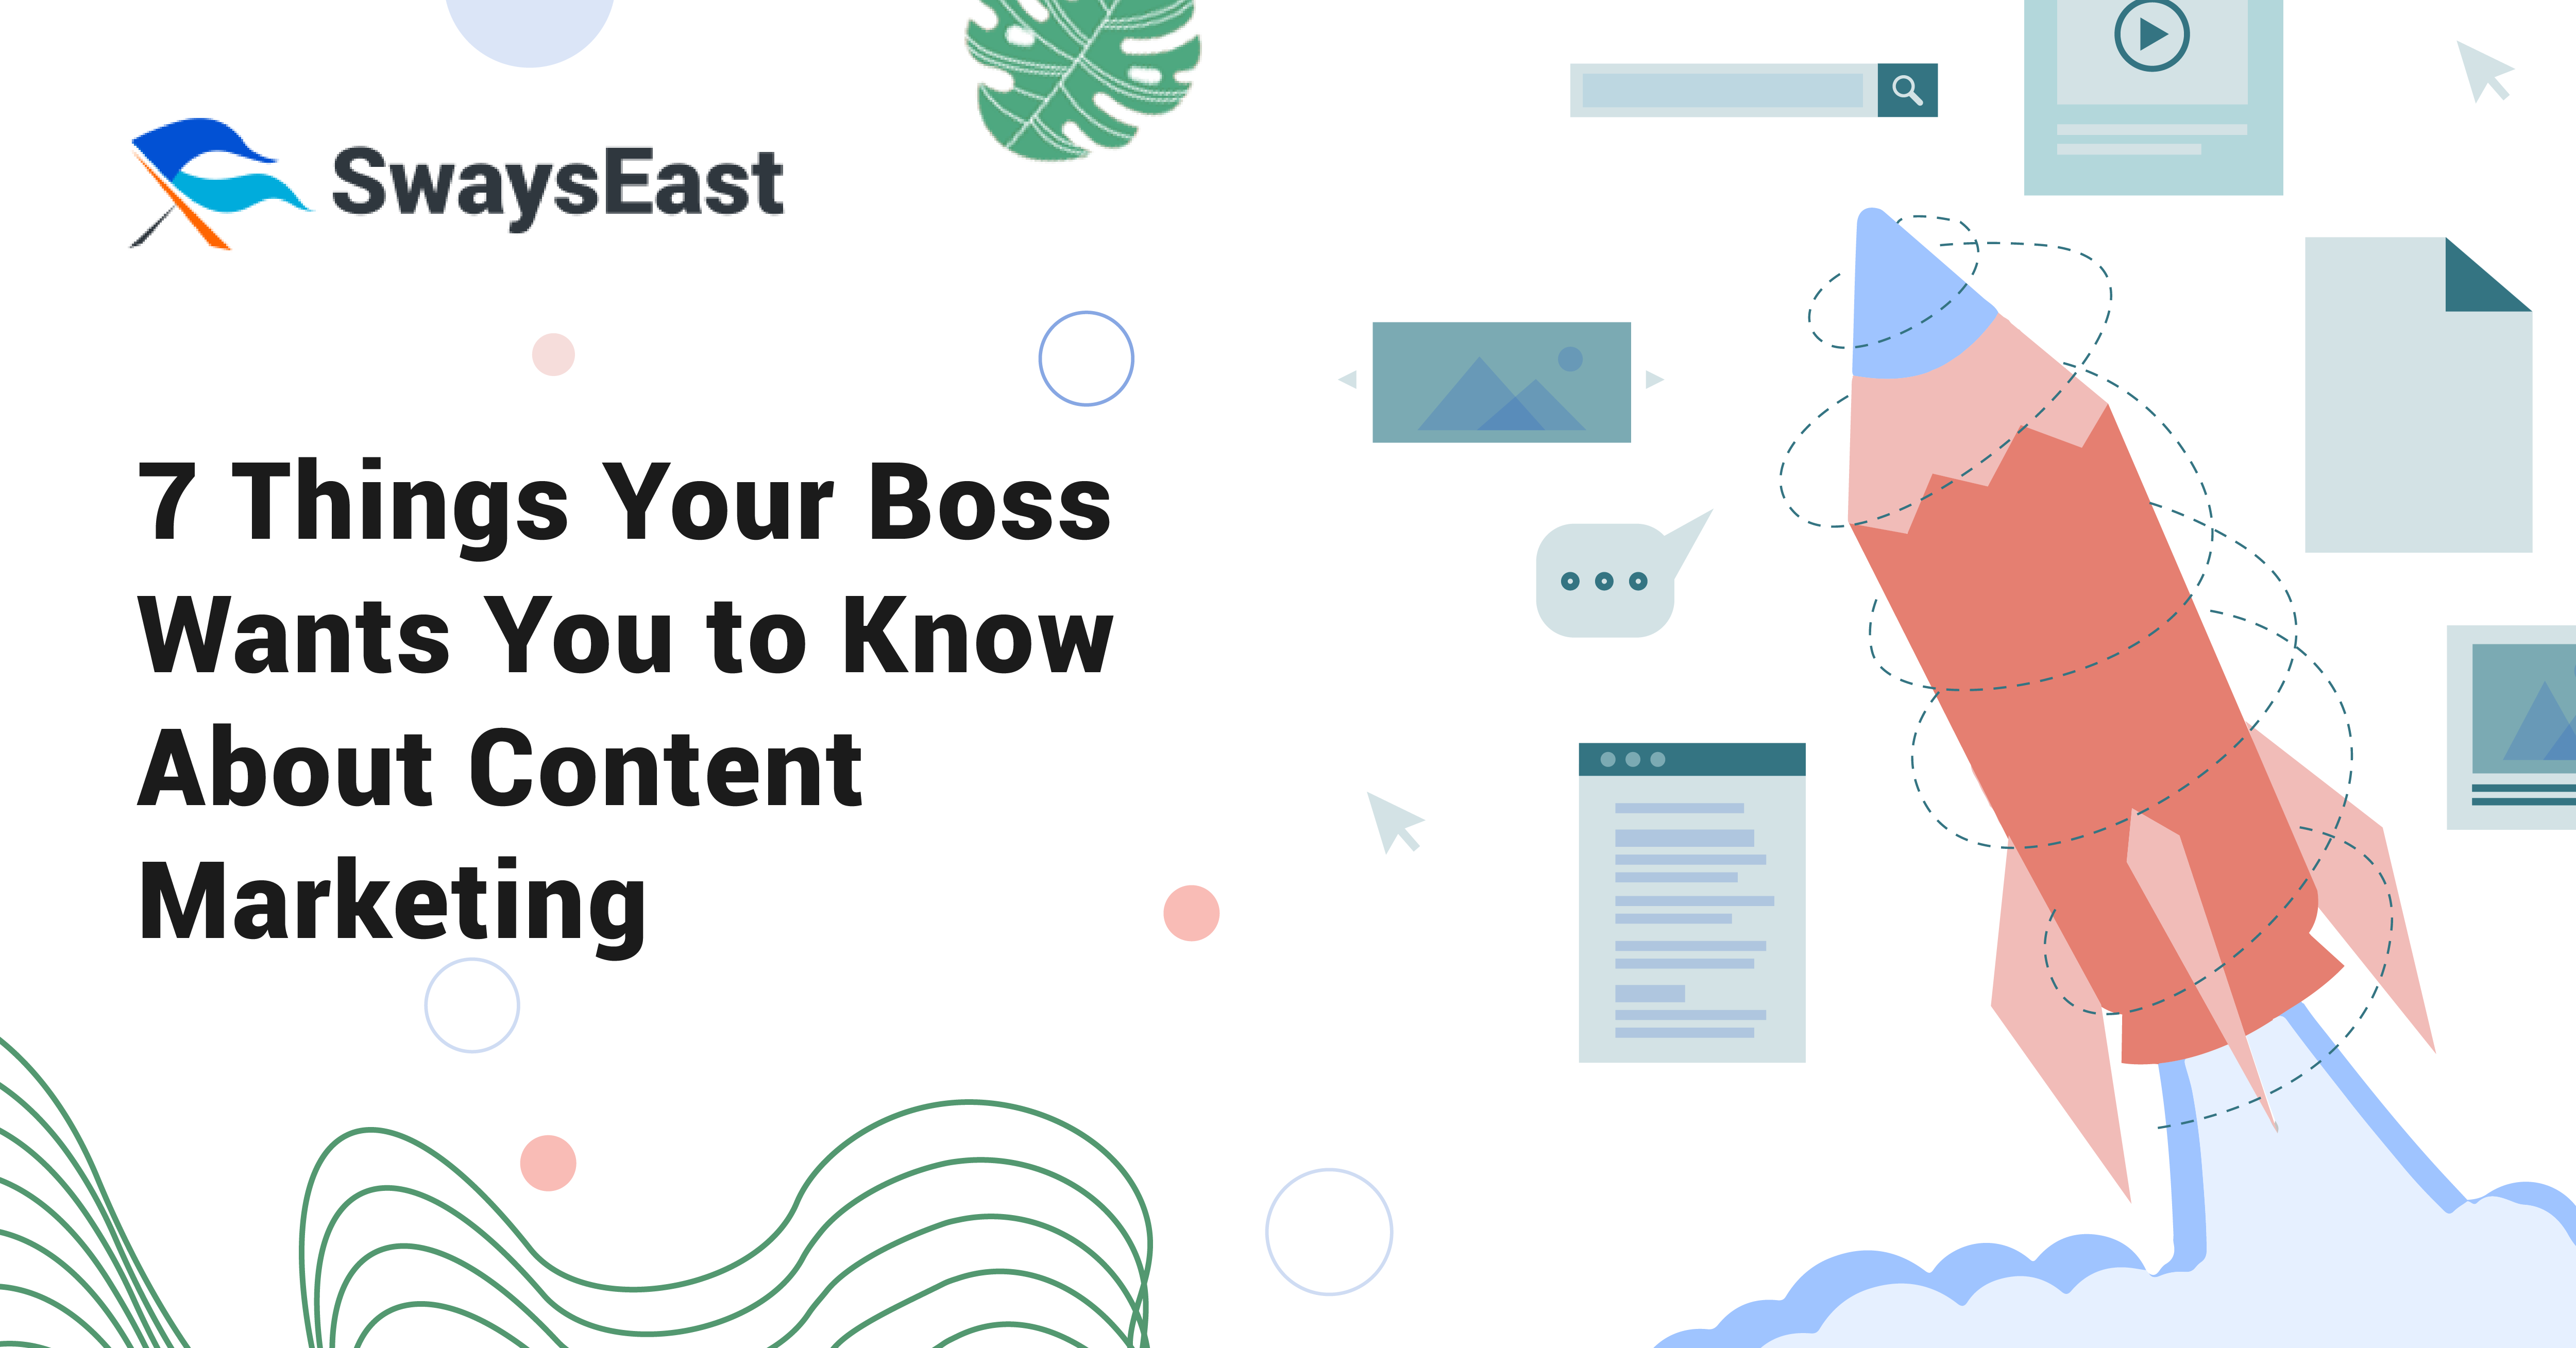 7 Things Your Boss Wants You to Know About Content Marketing